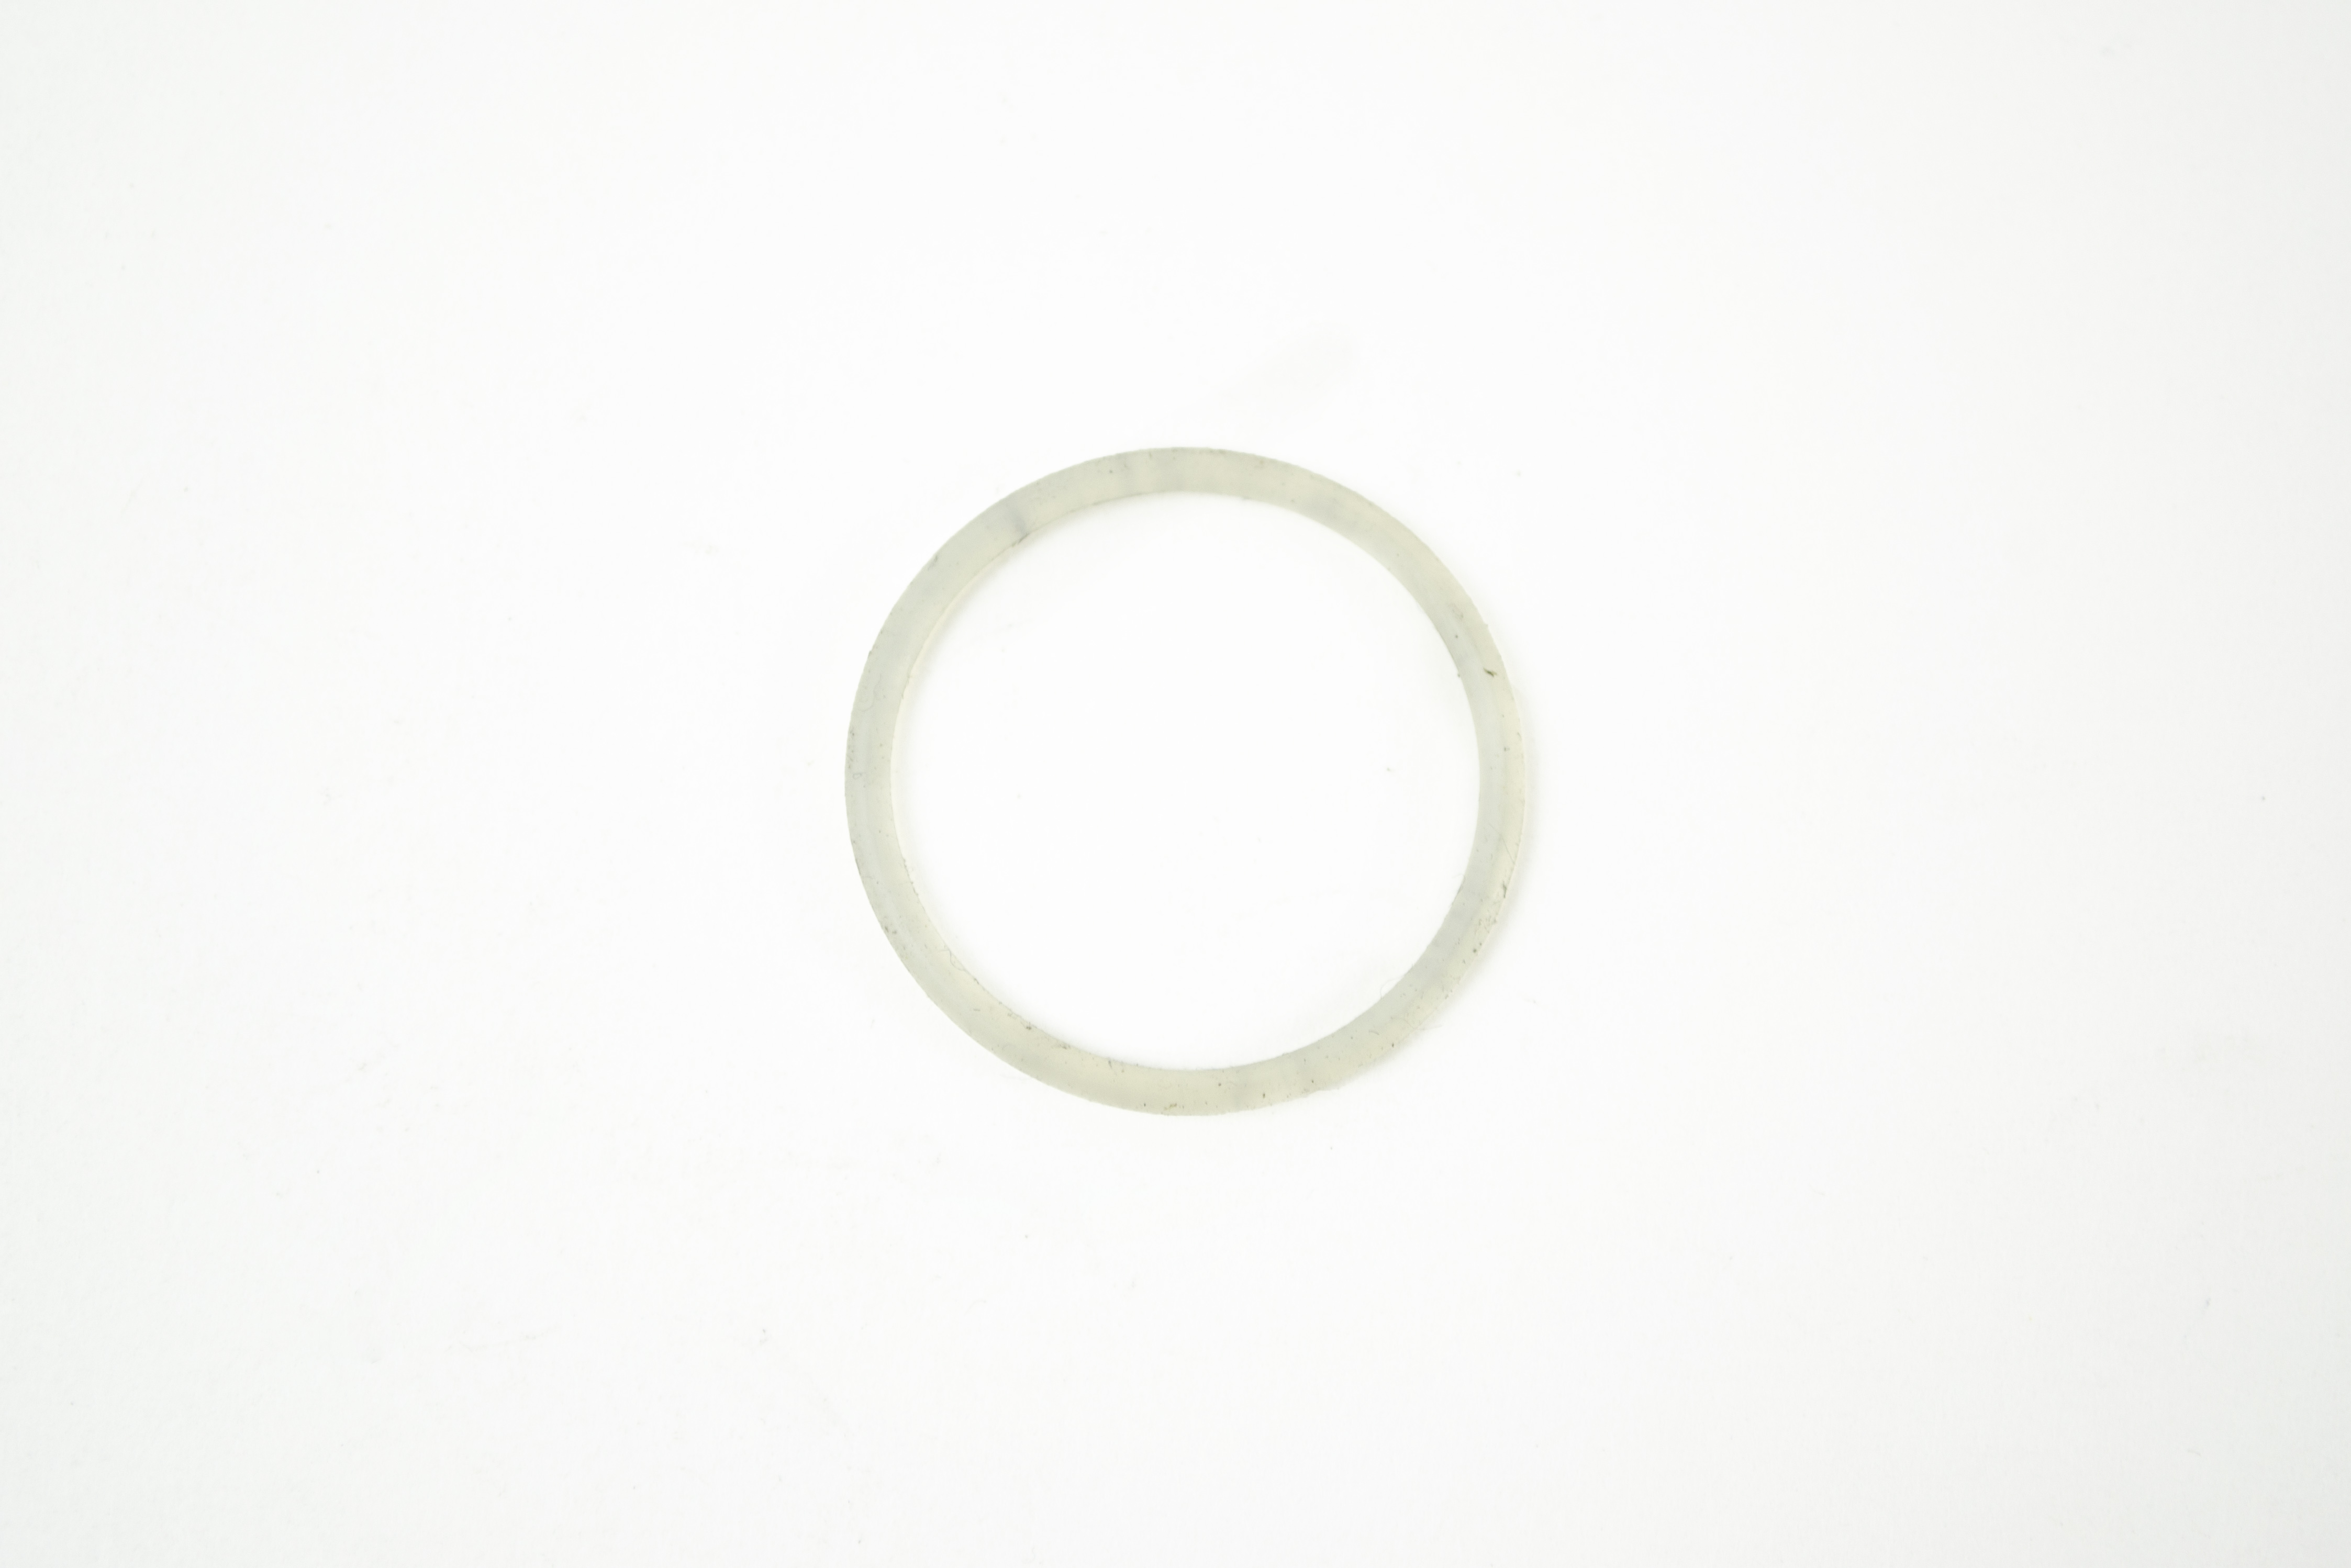 OEM O-Ring: Eyepiece Diopter Ring - CYF-5, URF-P5